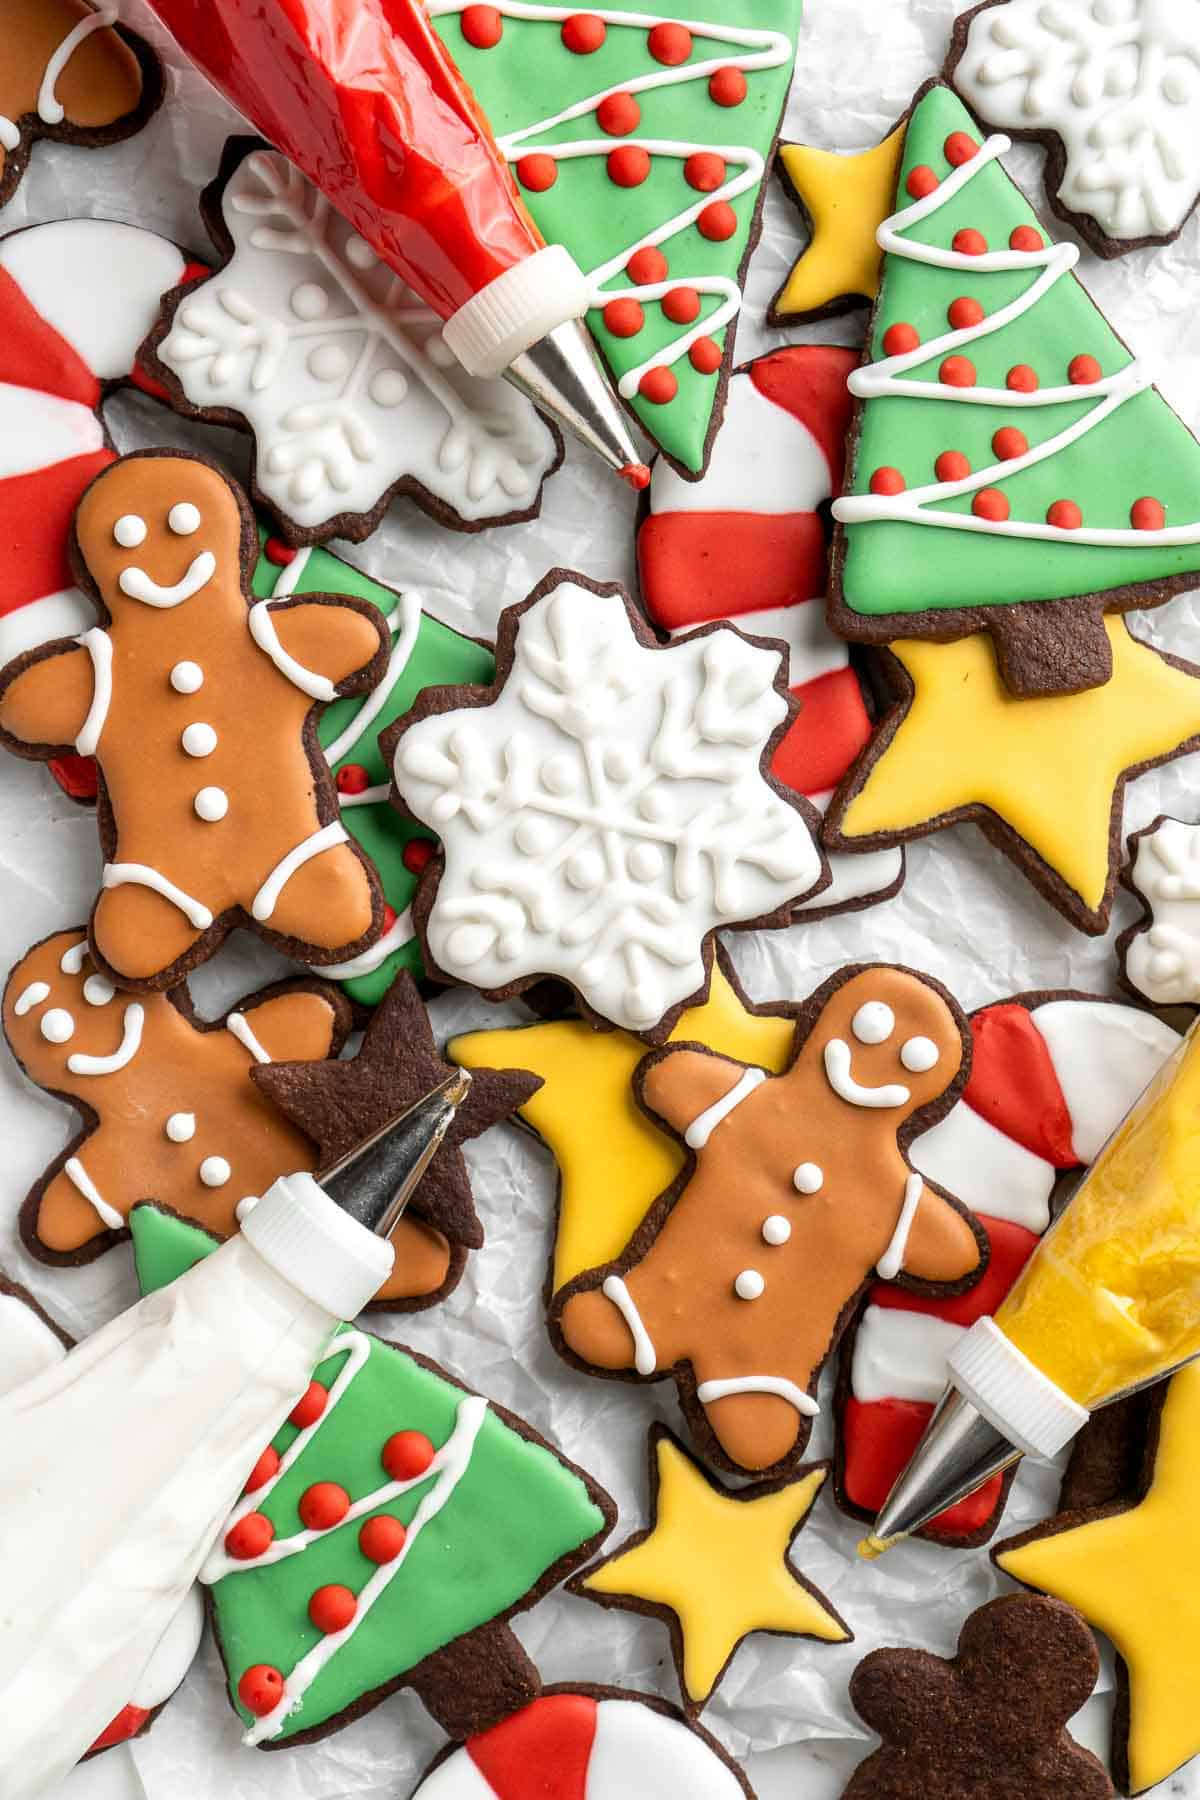 This quick and easy Royal Icing is smooth, thick, and glossy — it’s the only frosting recipe you need for perfectly decorated cookies! | aheadofthyme.com